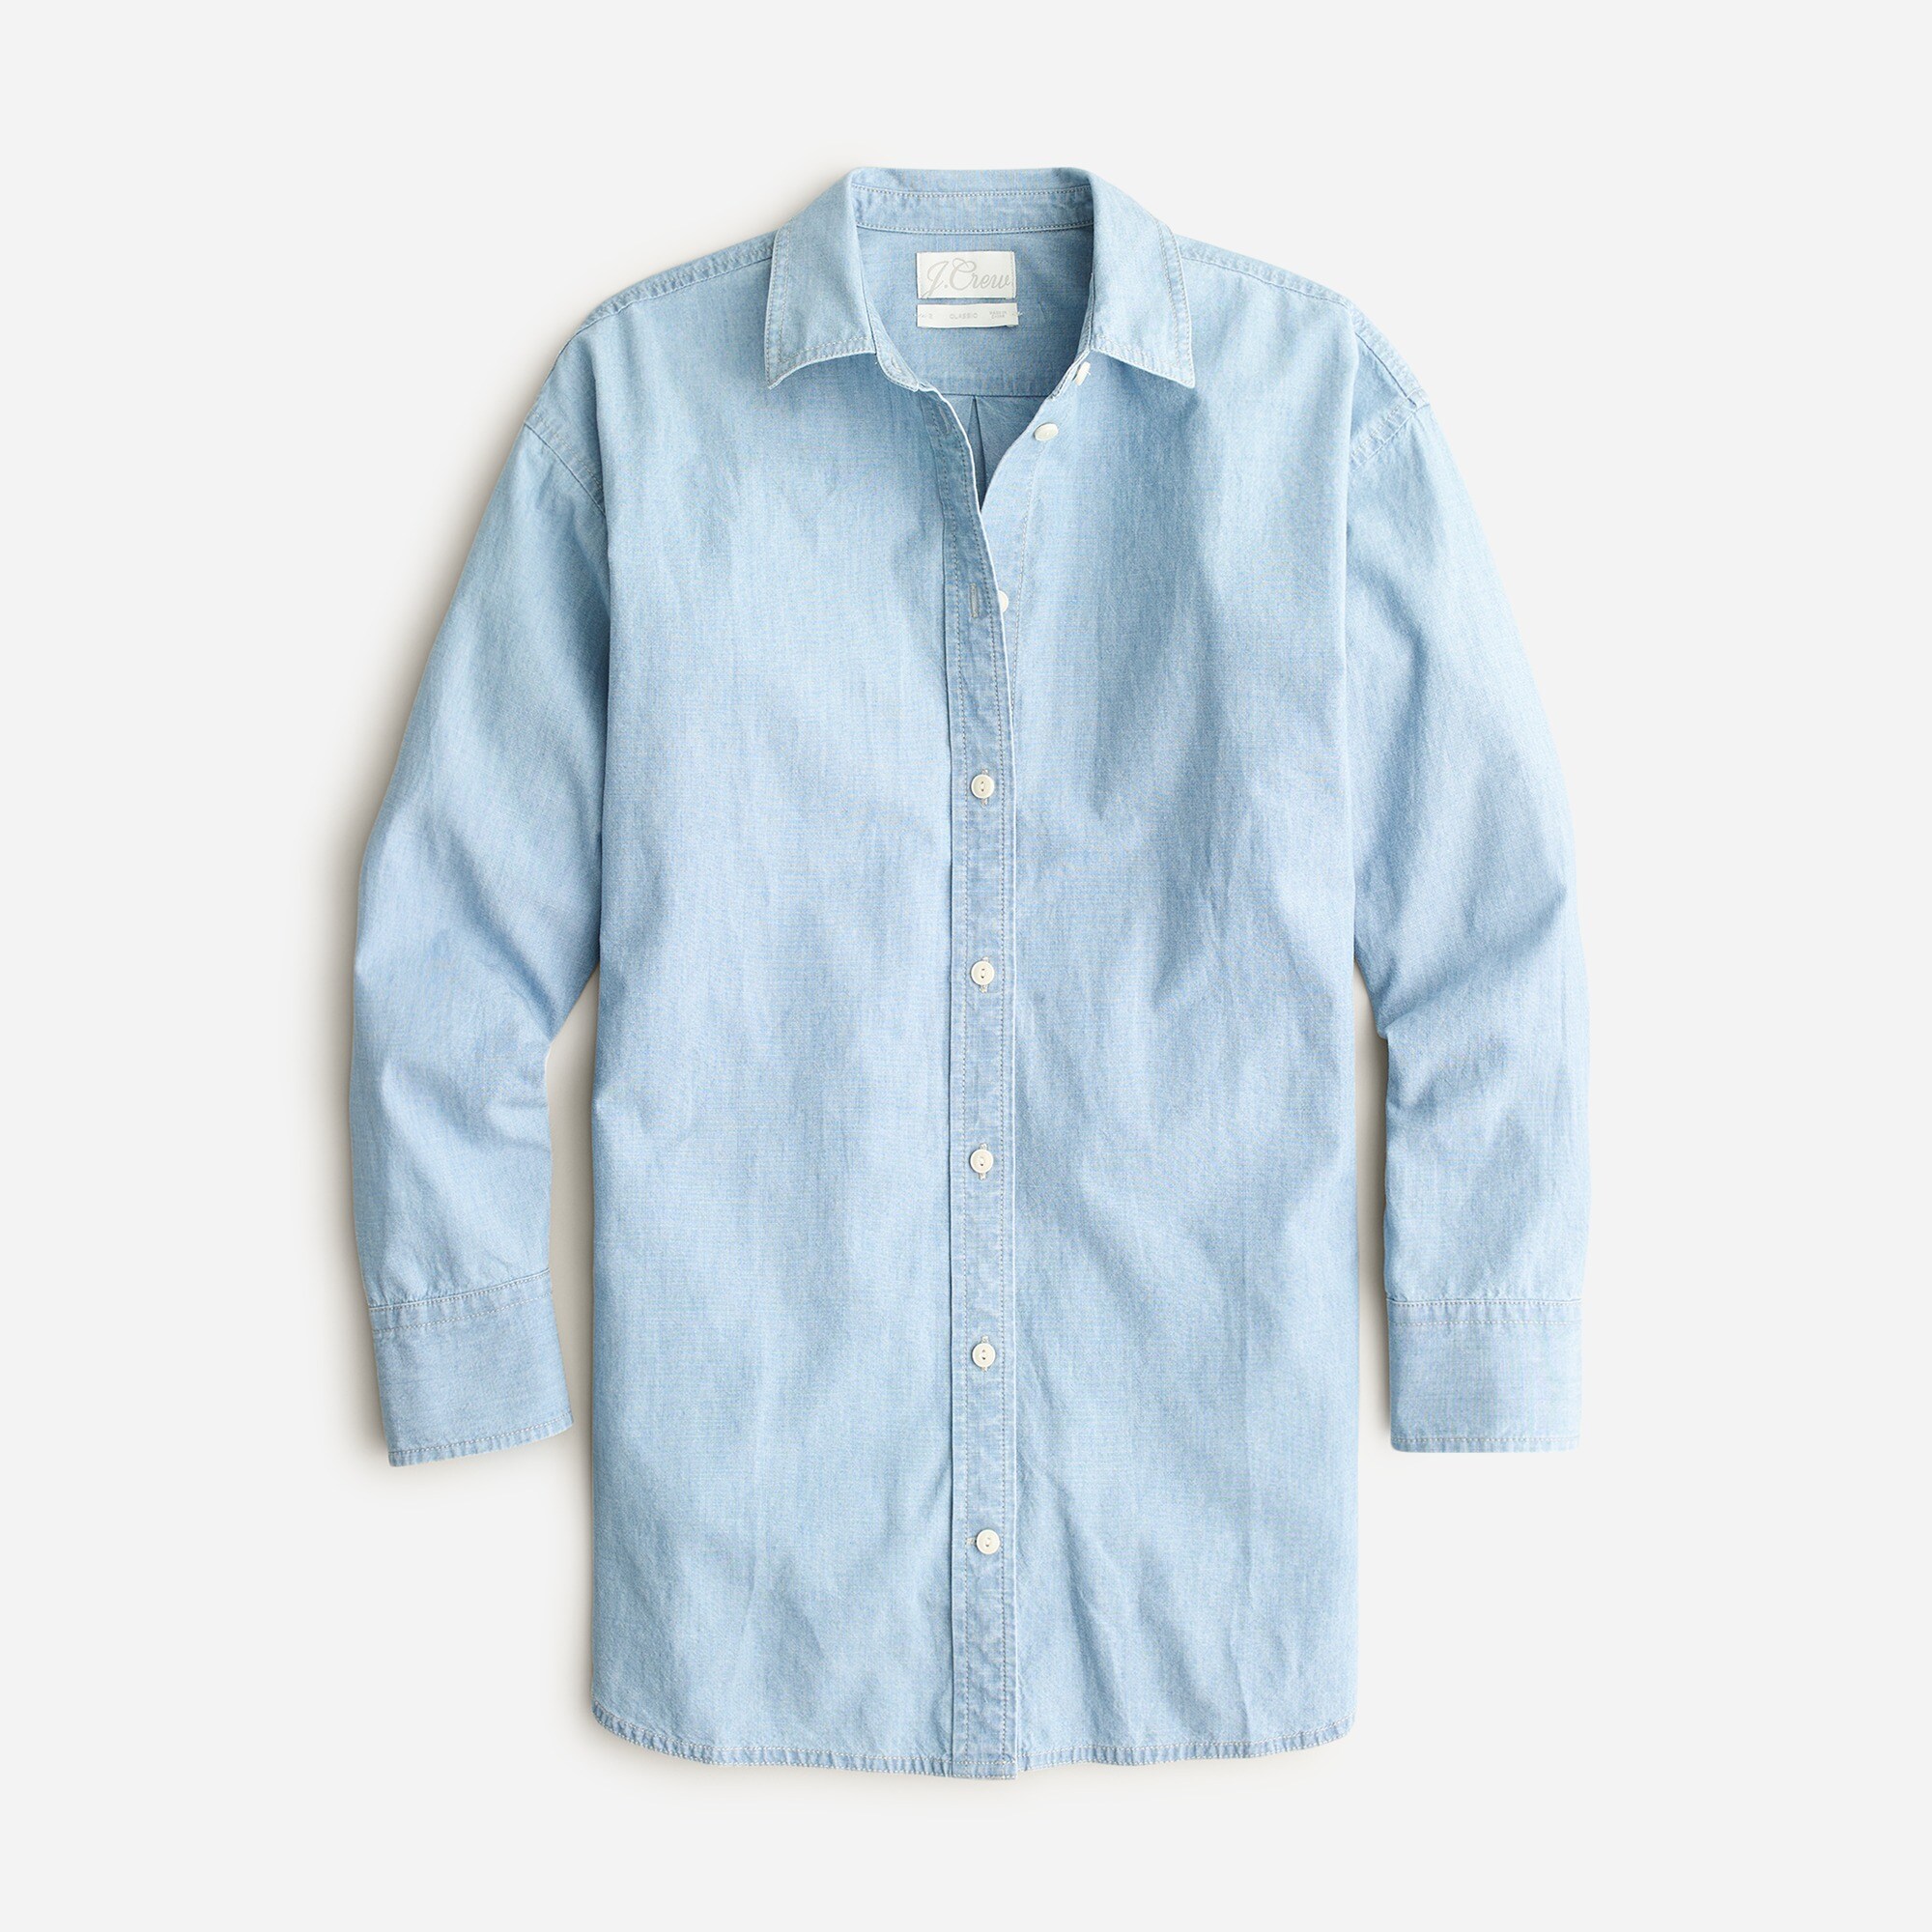  Tall relaxed-fit chambray shirt